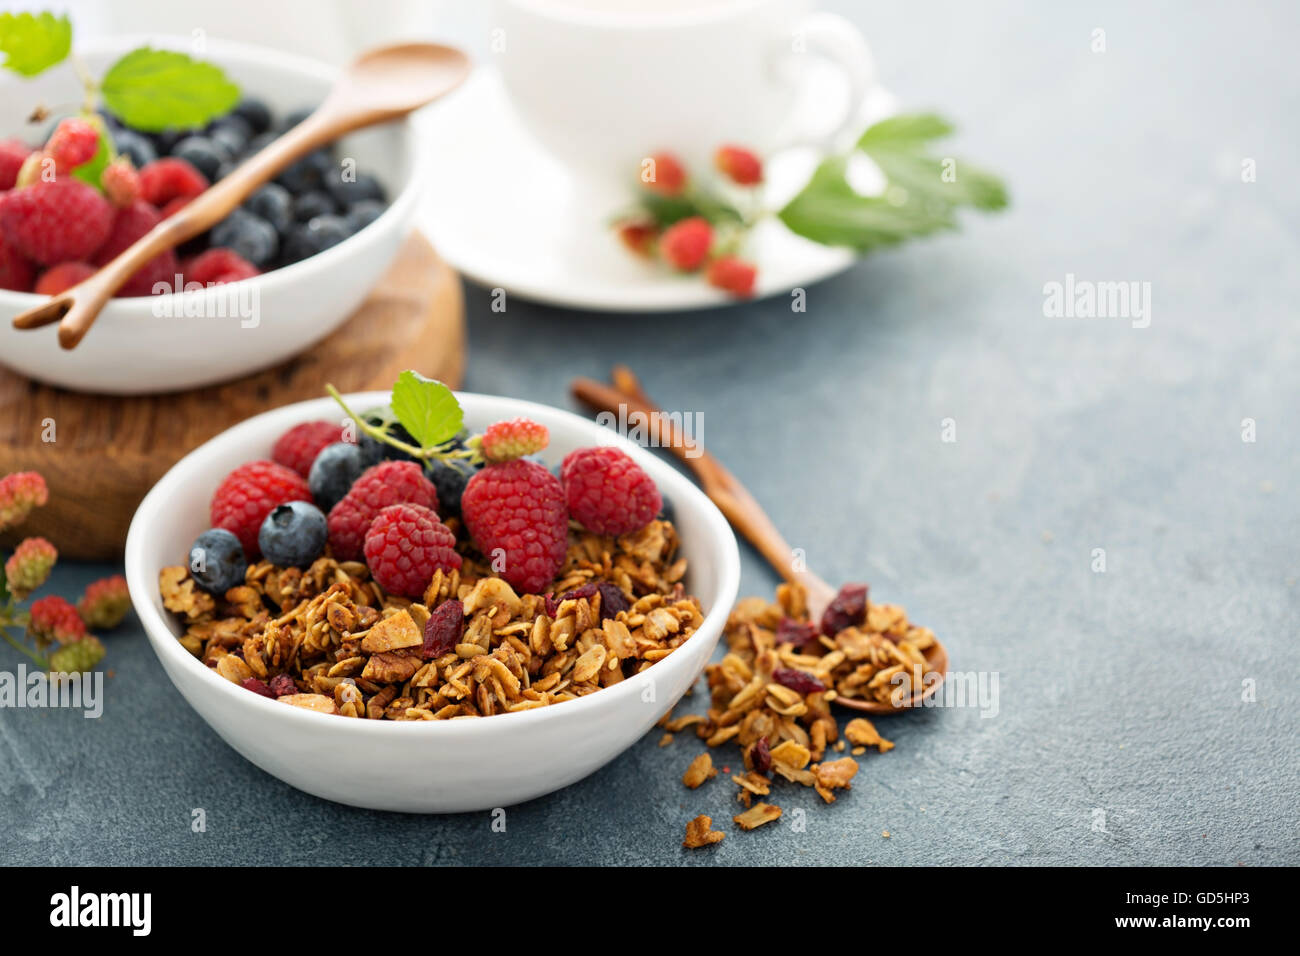 Granola and berries with coffee Stock Photo